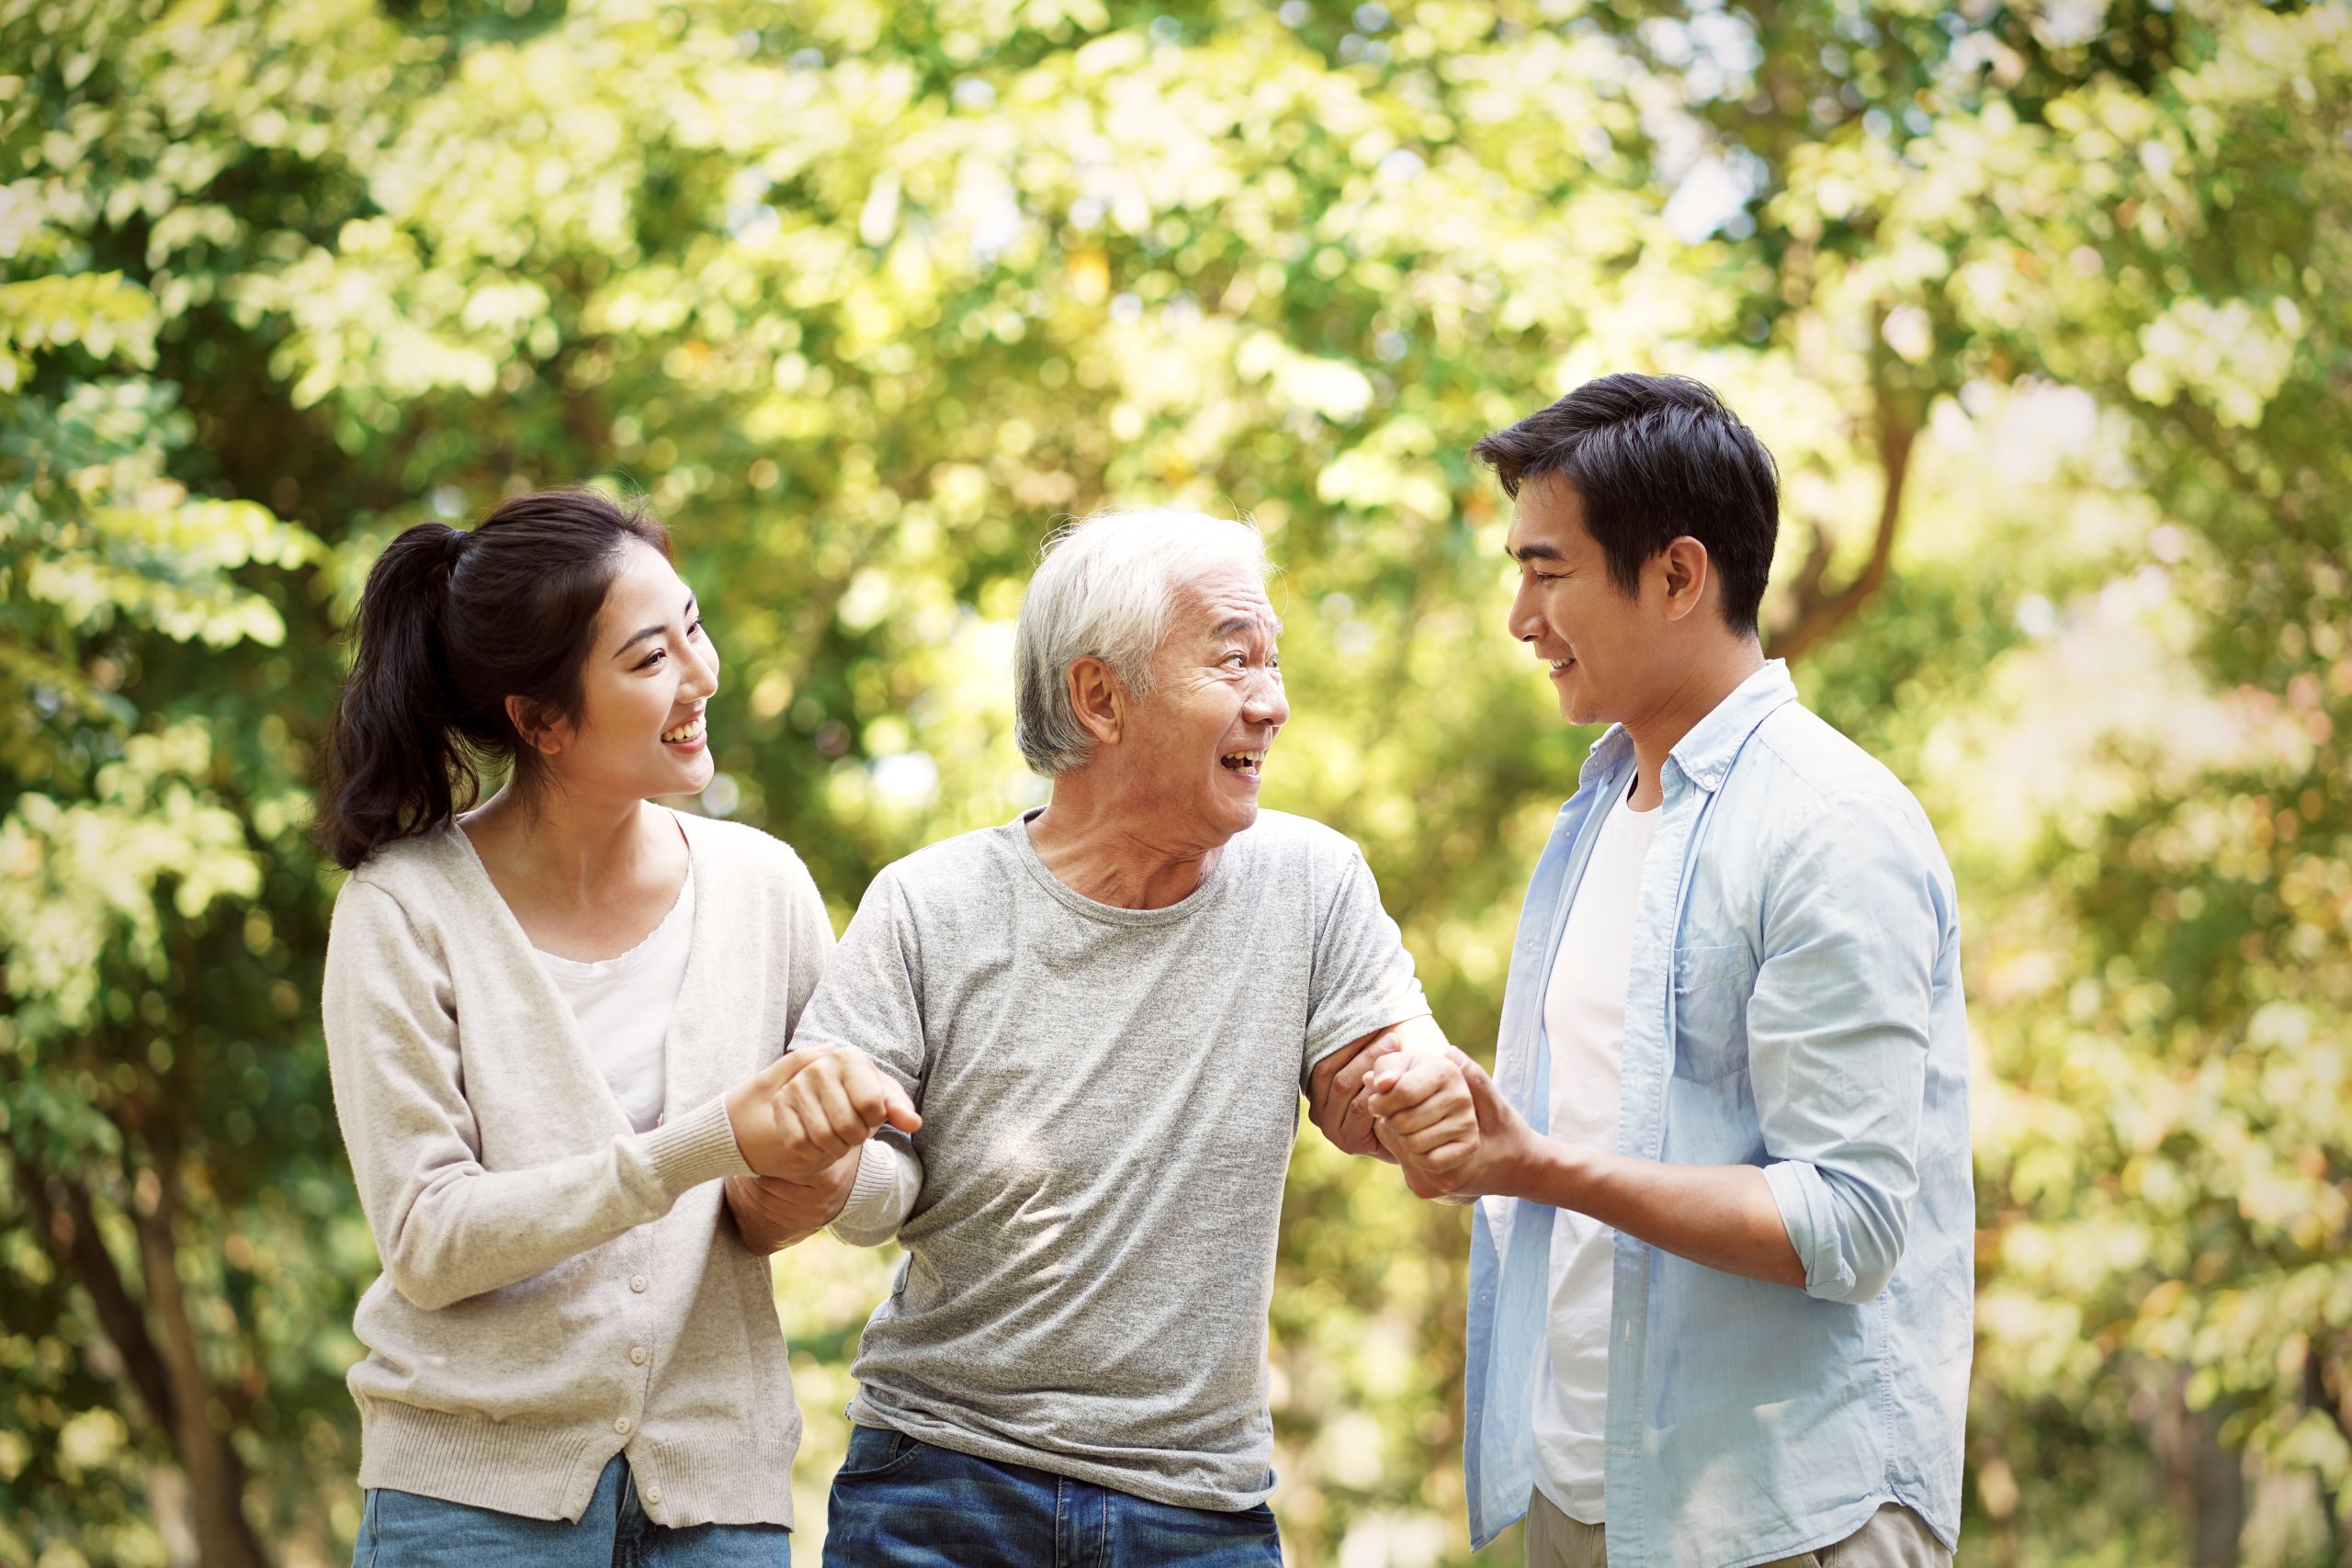 We help Korean seniors with barriers to healthcare and community services in the GTA.